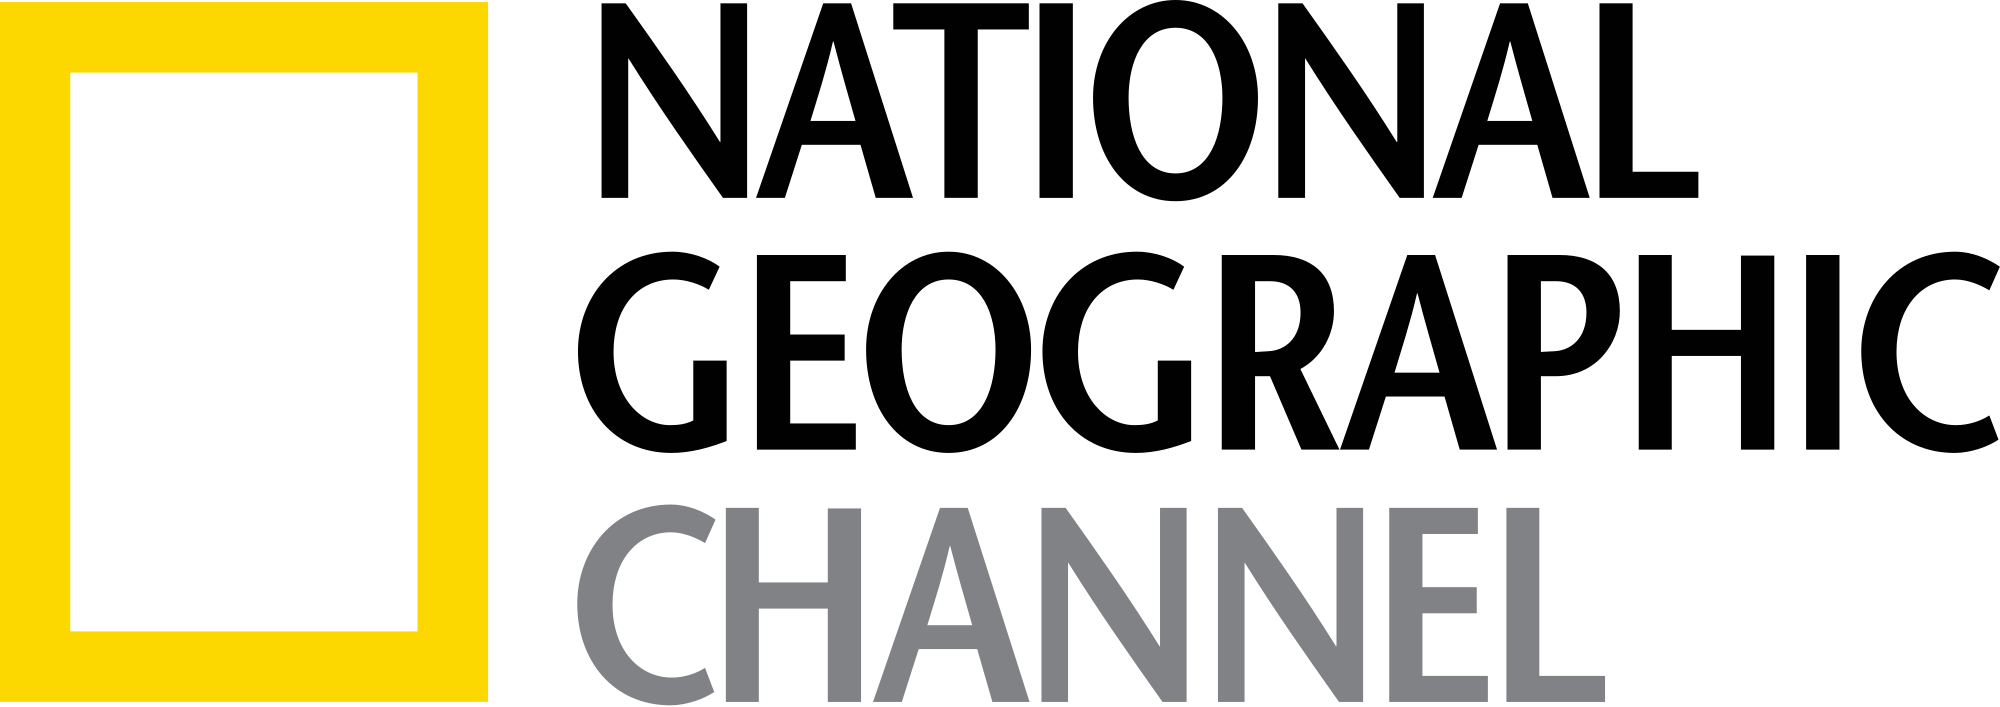 Style Channel Logo - File:National Geographic Channel.svg - Wikimedia Commons